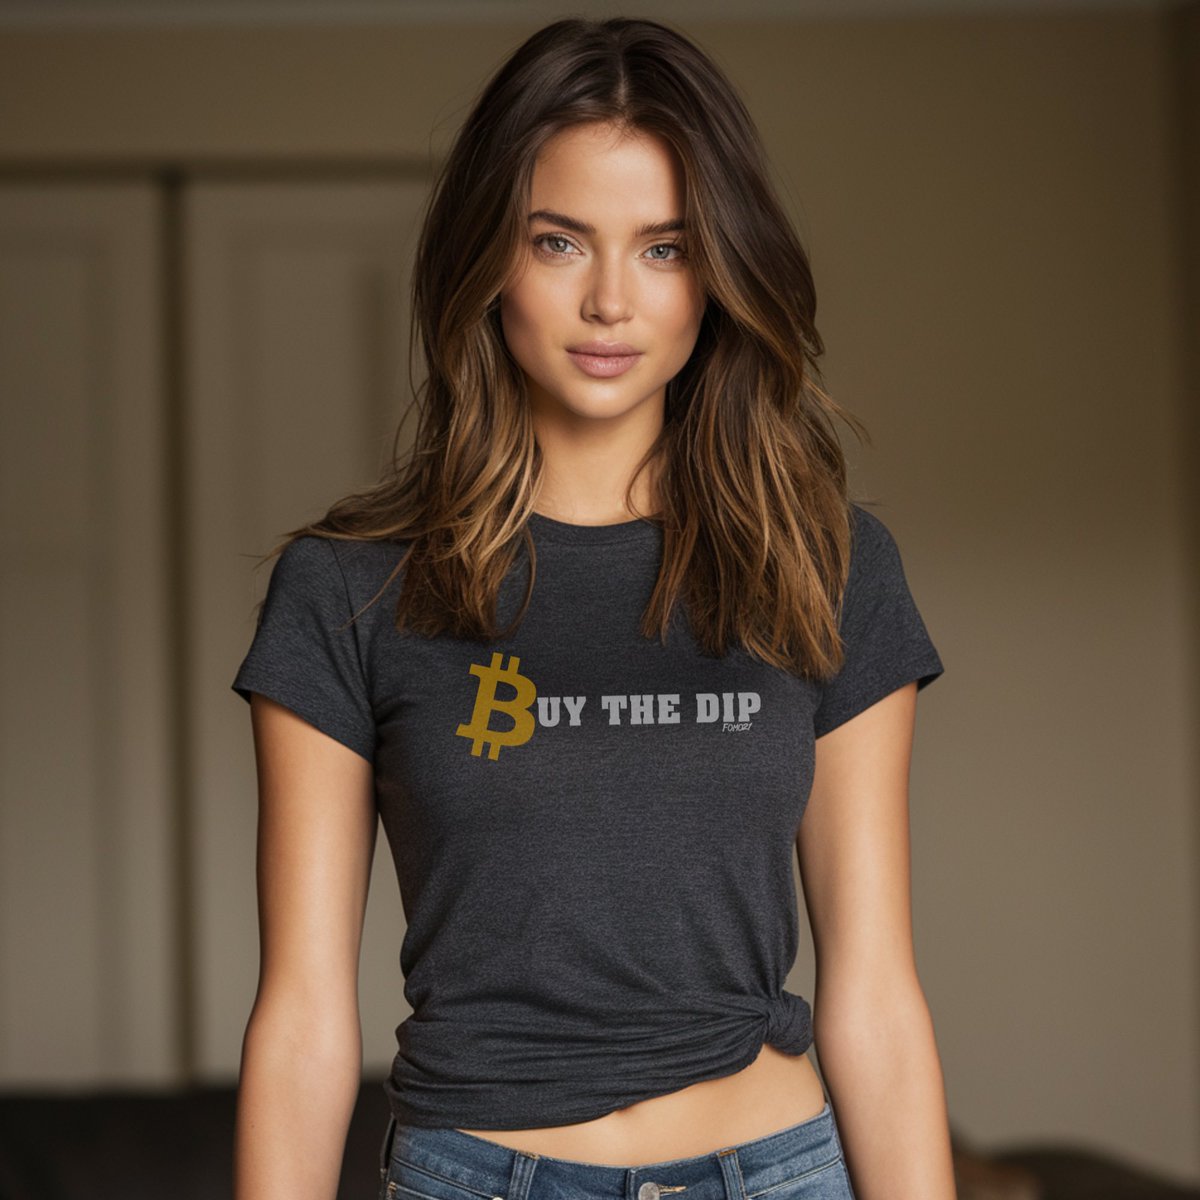 Are you buying the dip? #Bitcoin